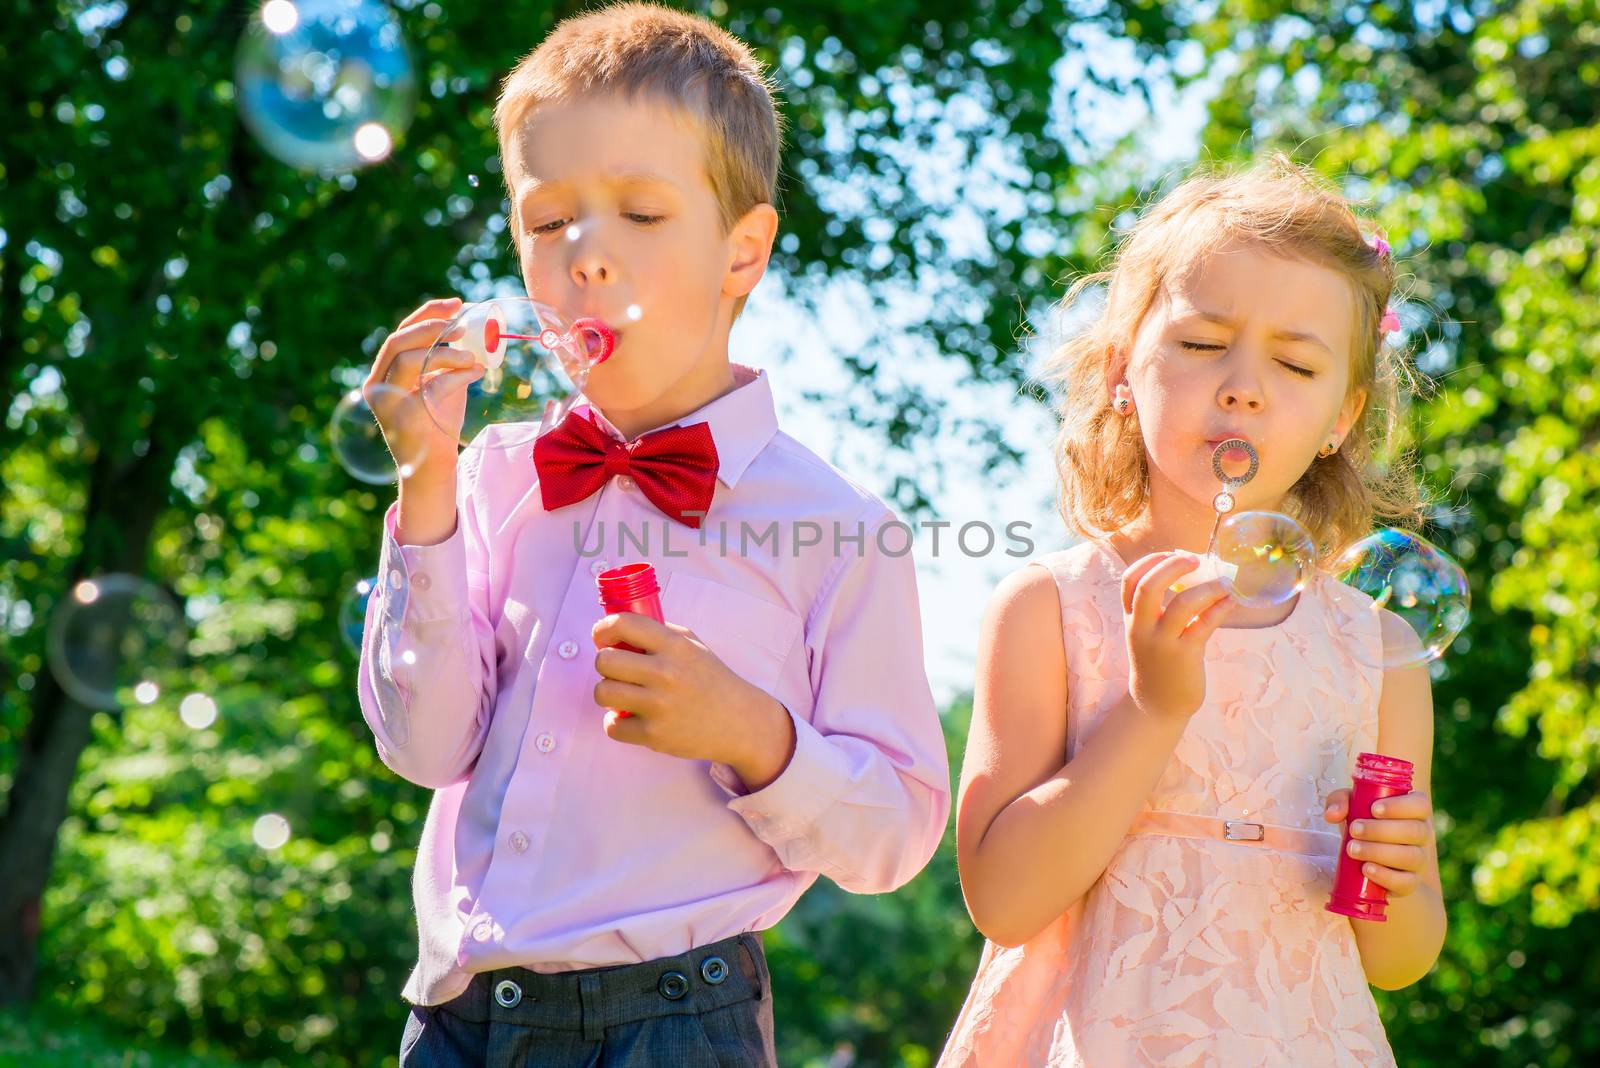 children at the celebration with soap bubbles on a summer day